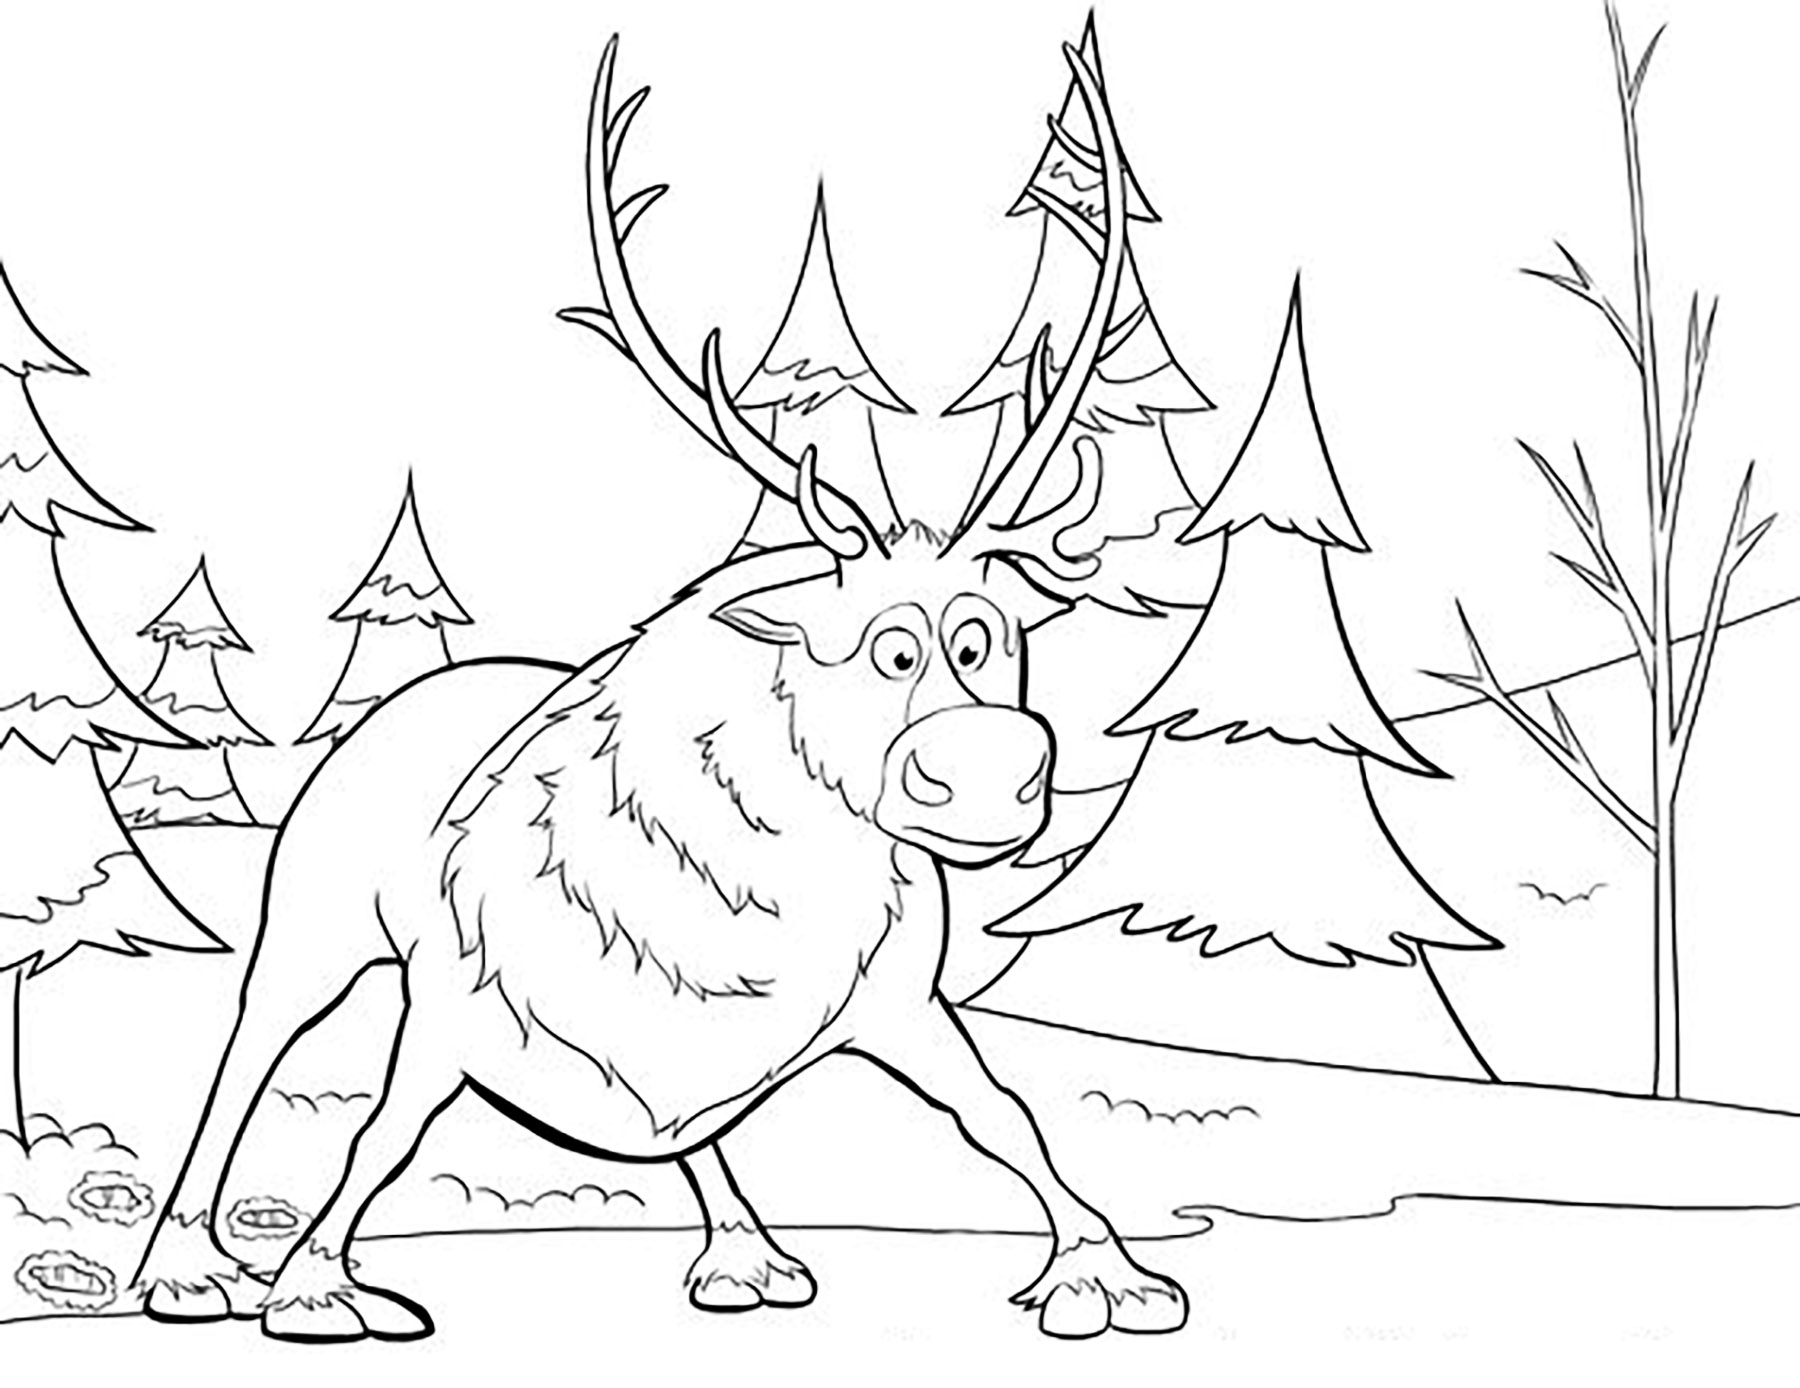 Frozen coloring page to download for free : Sven